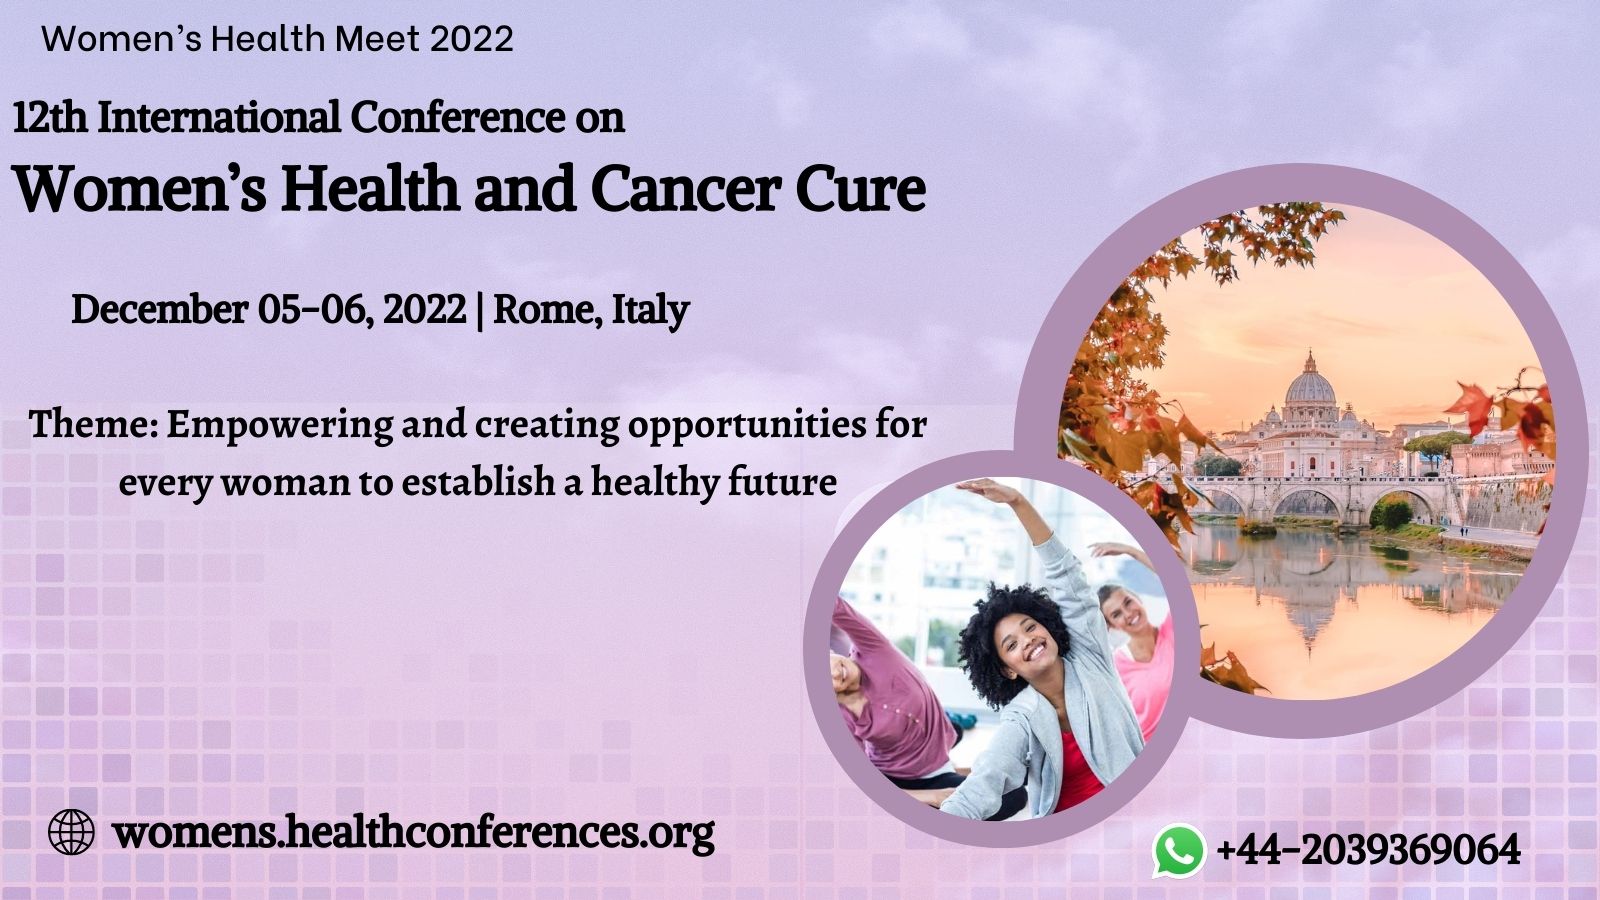 12th International Conference on Women’s Health and Cancer Cure, Rome, Italy